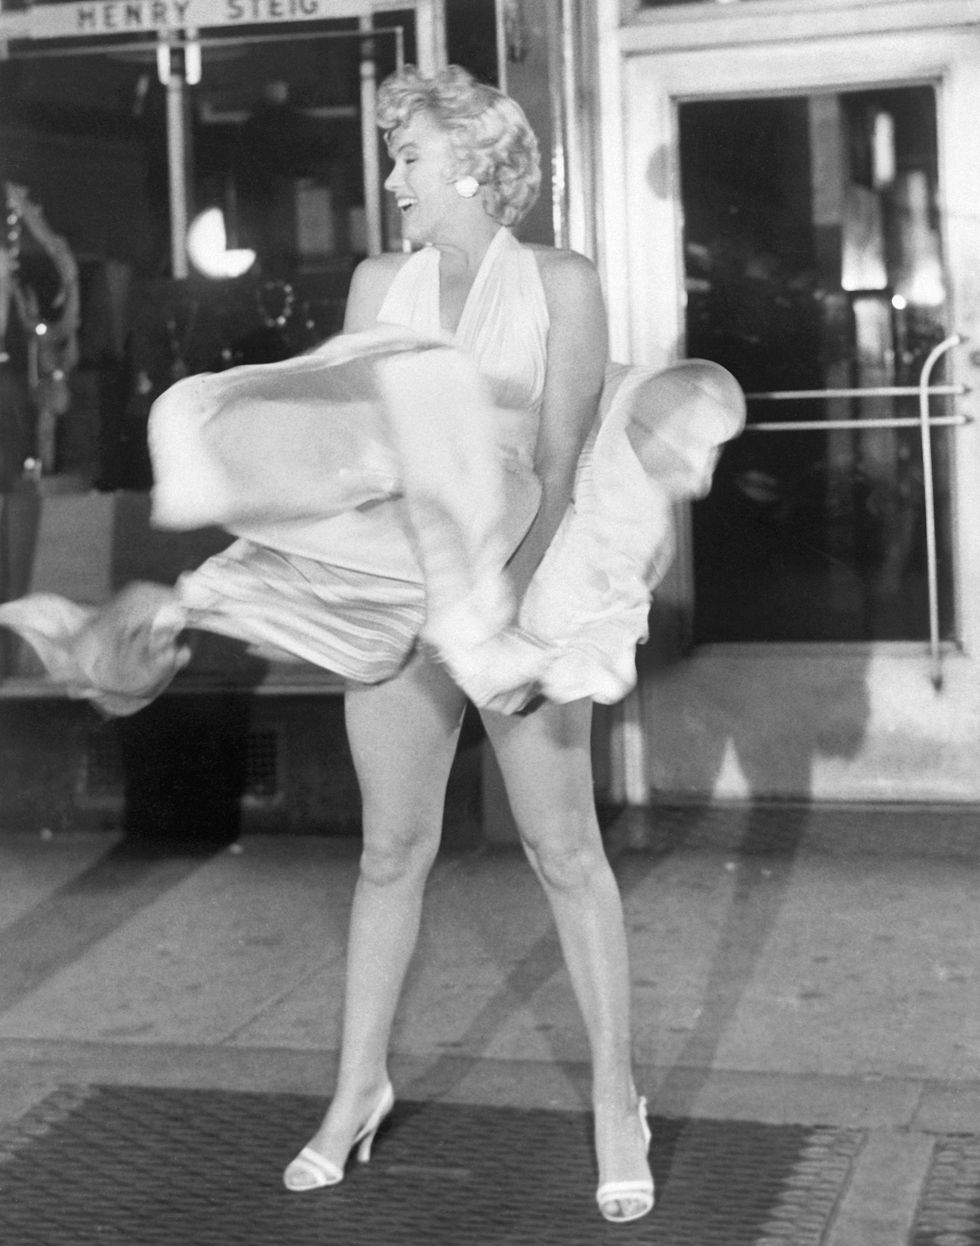 actress marilyn monroe tries to hold down her dress as wind from a subway grate blows it upward during filming of the seven year itch motion picture in manhattan